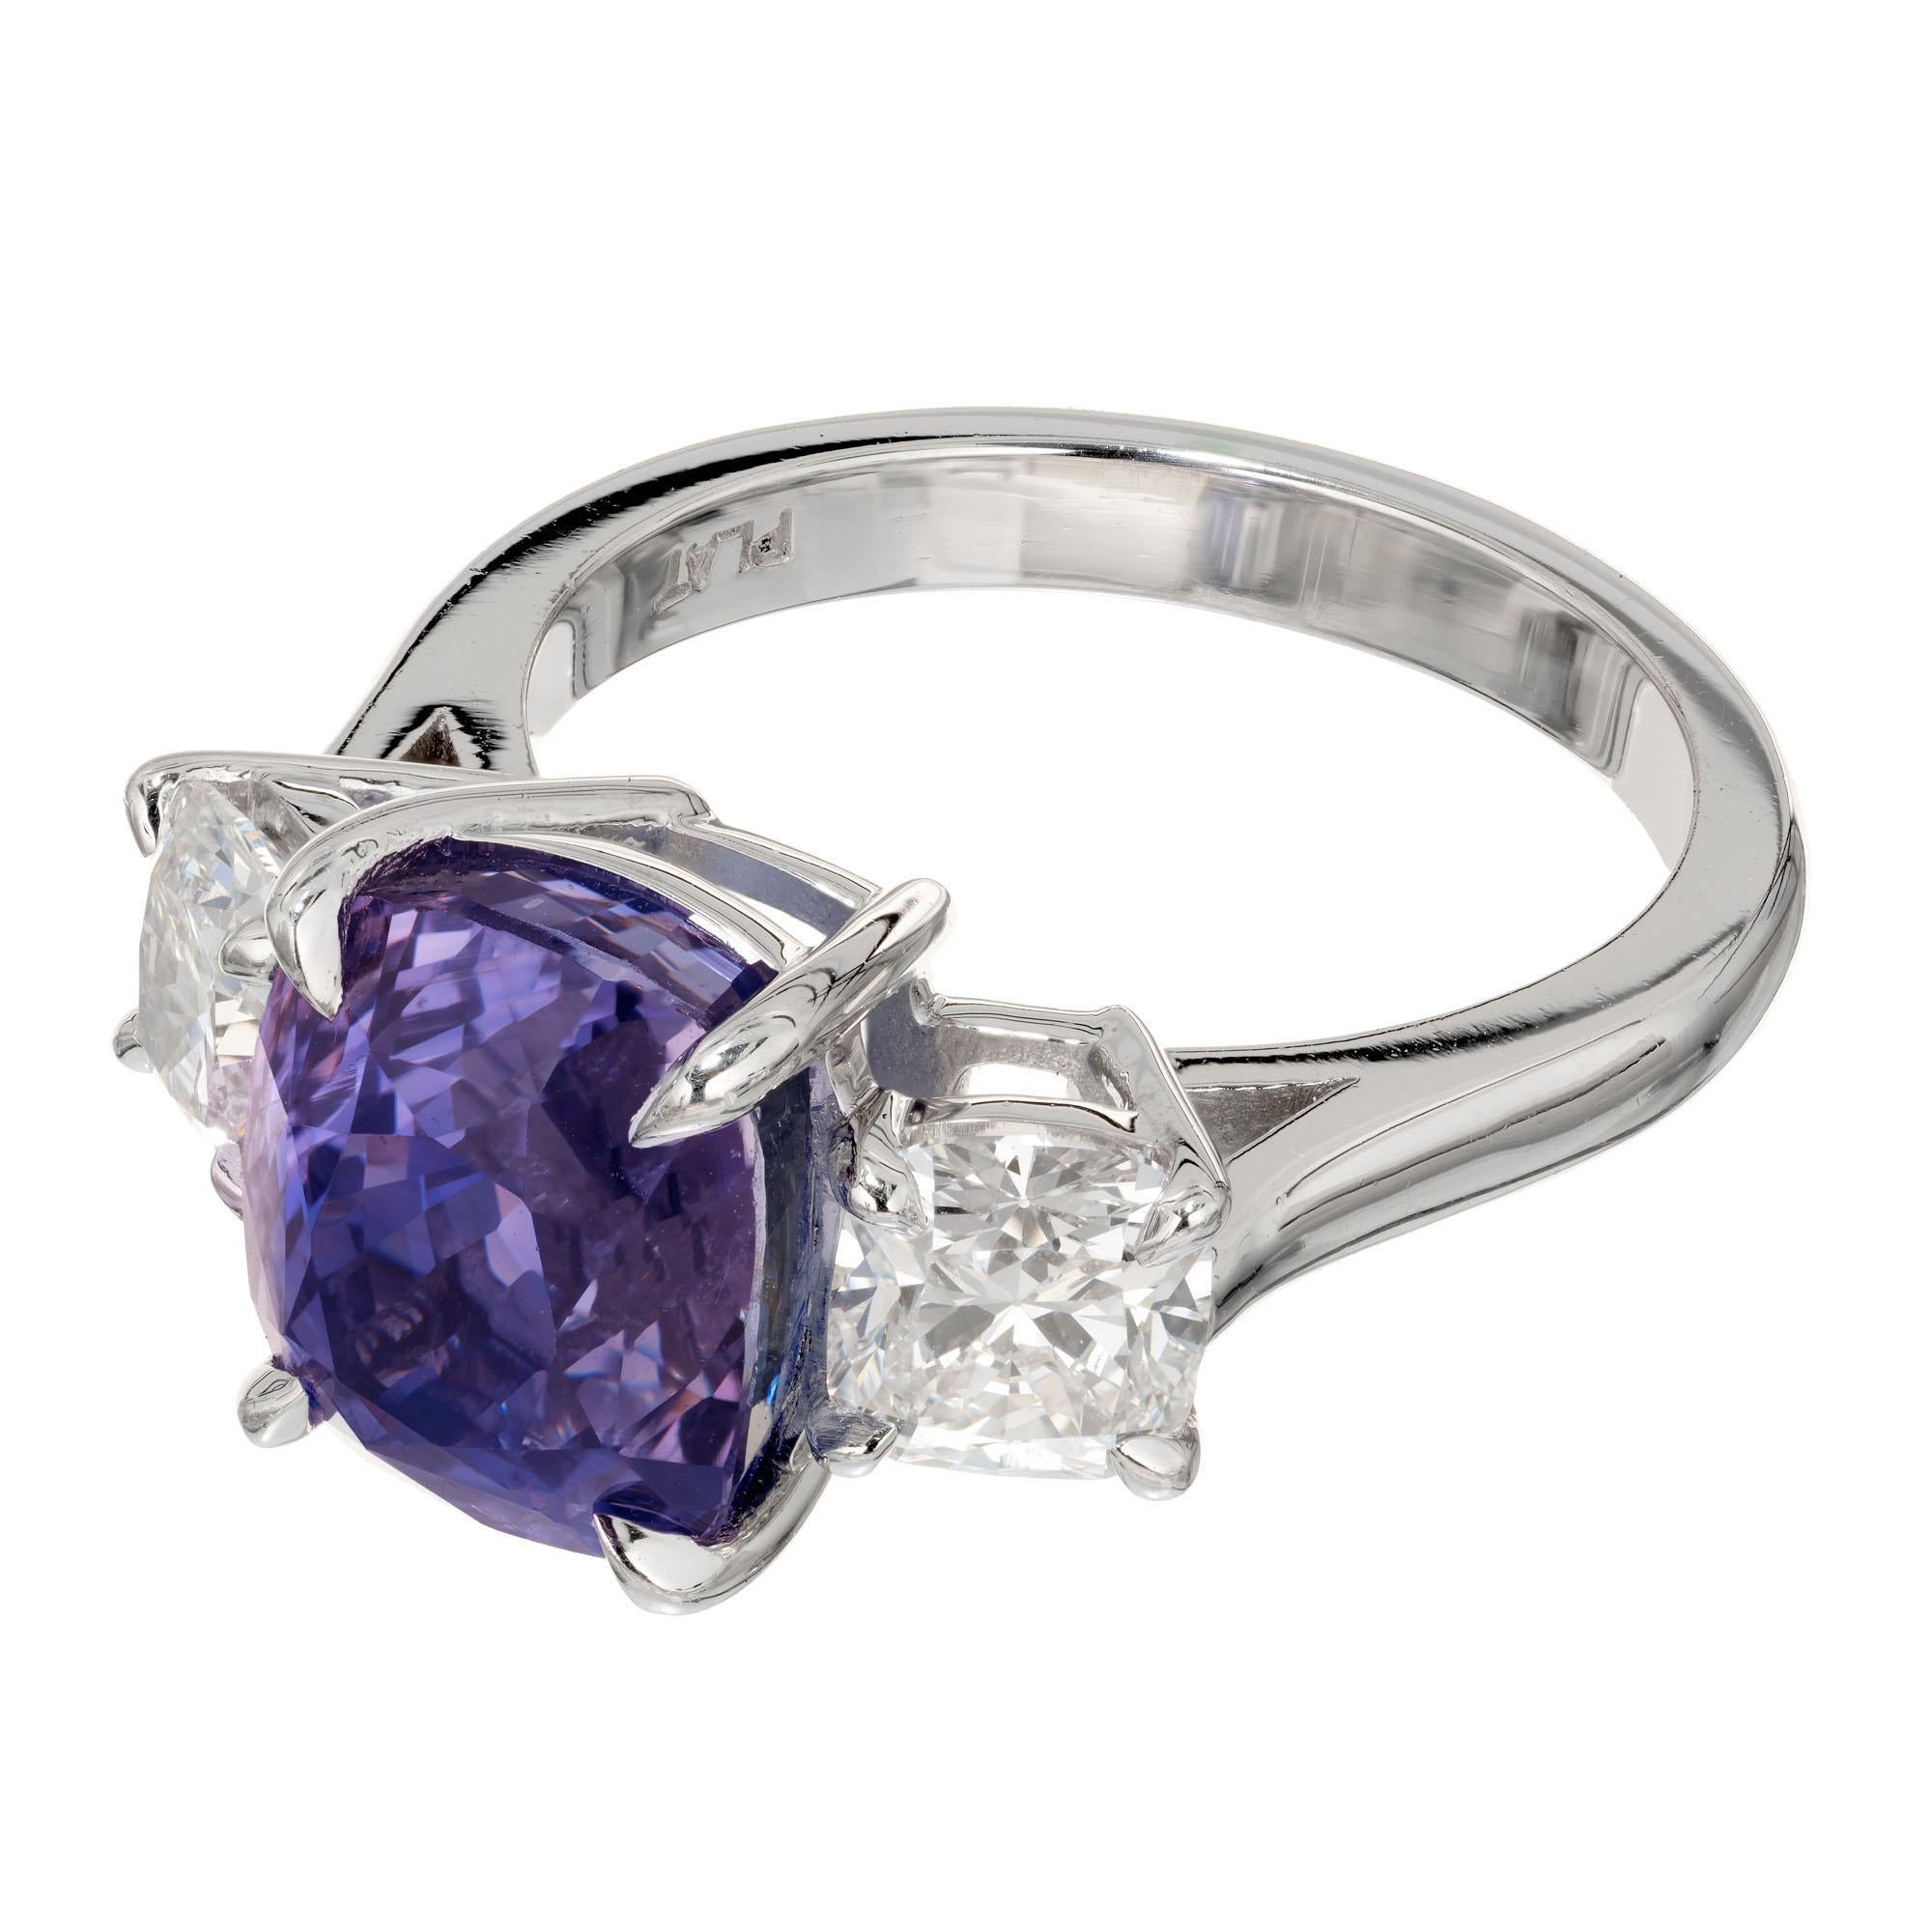 Natural color change 7.06ct cushion cut Sapphire and diamond engagement ring. GIA certified to change color from violet to purple in different light. Accented with 2 antique cushion cut diamonds in a platinum three-stone setting.

1 antique cushion